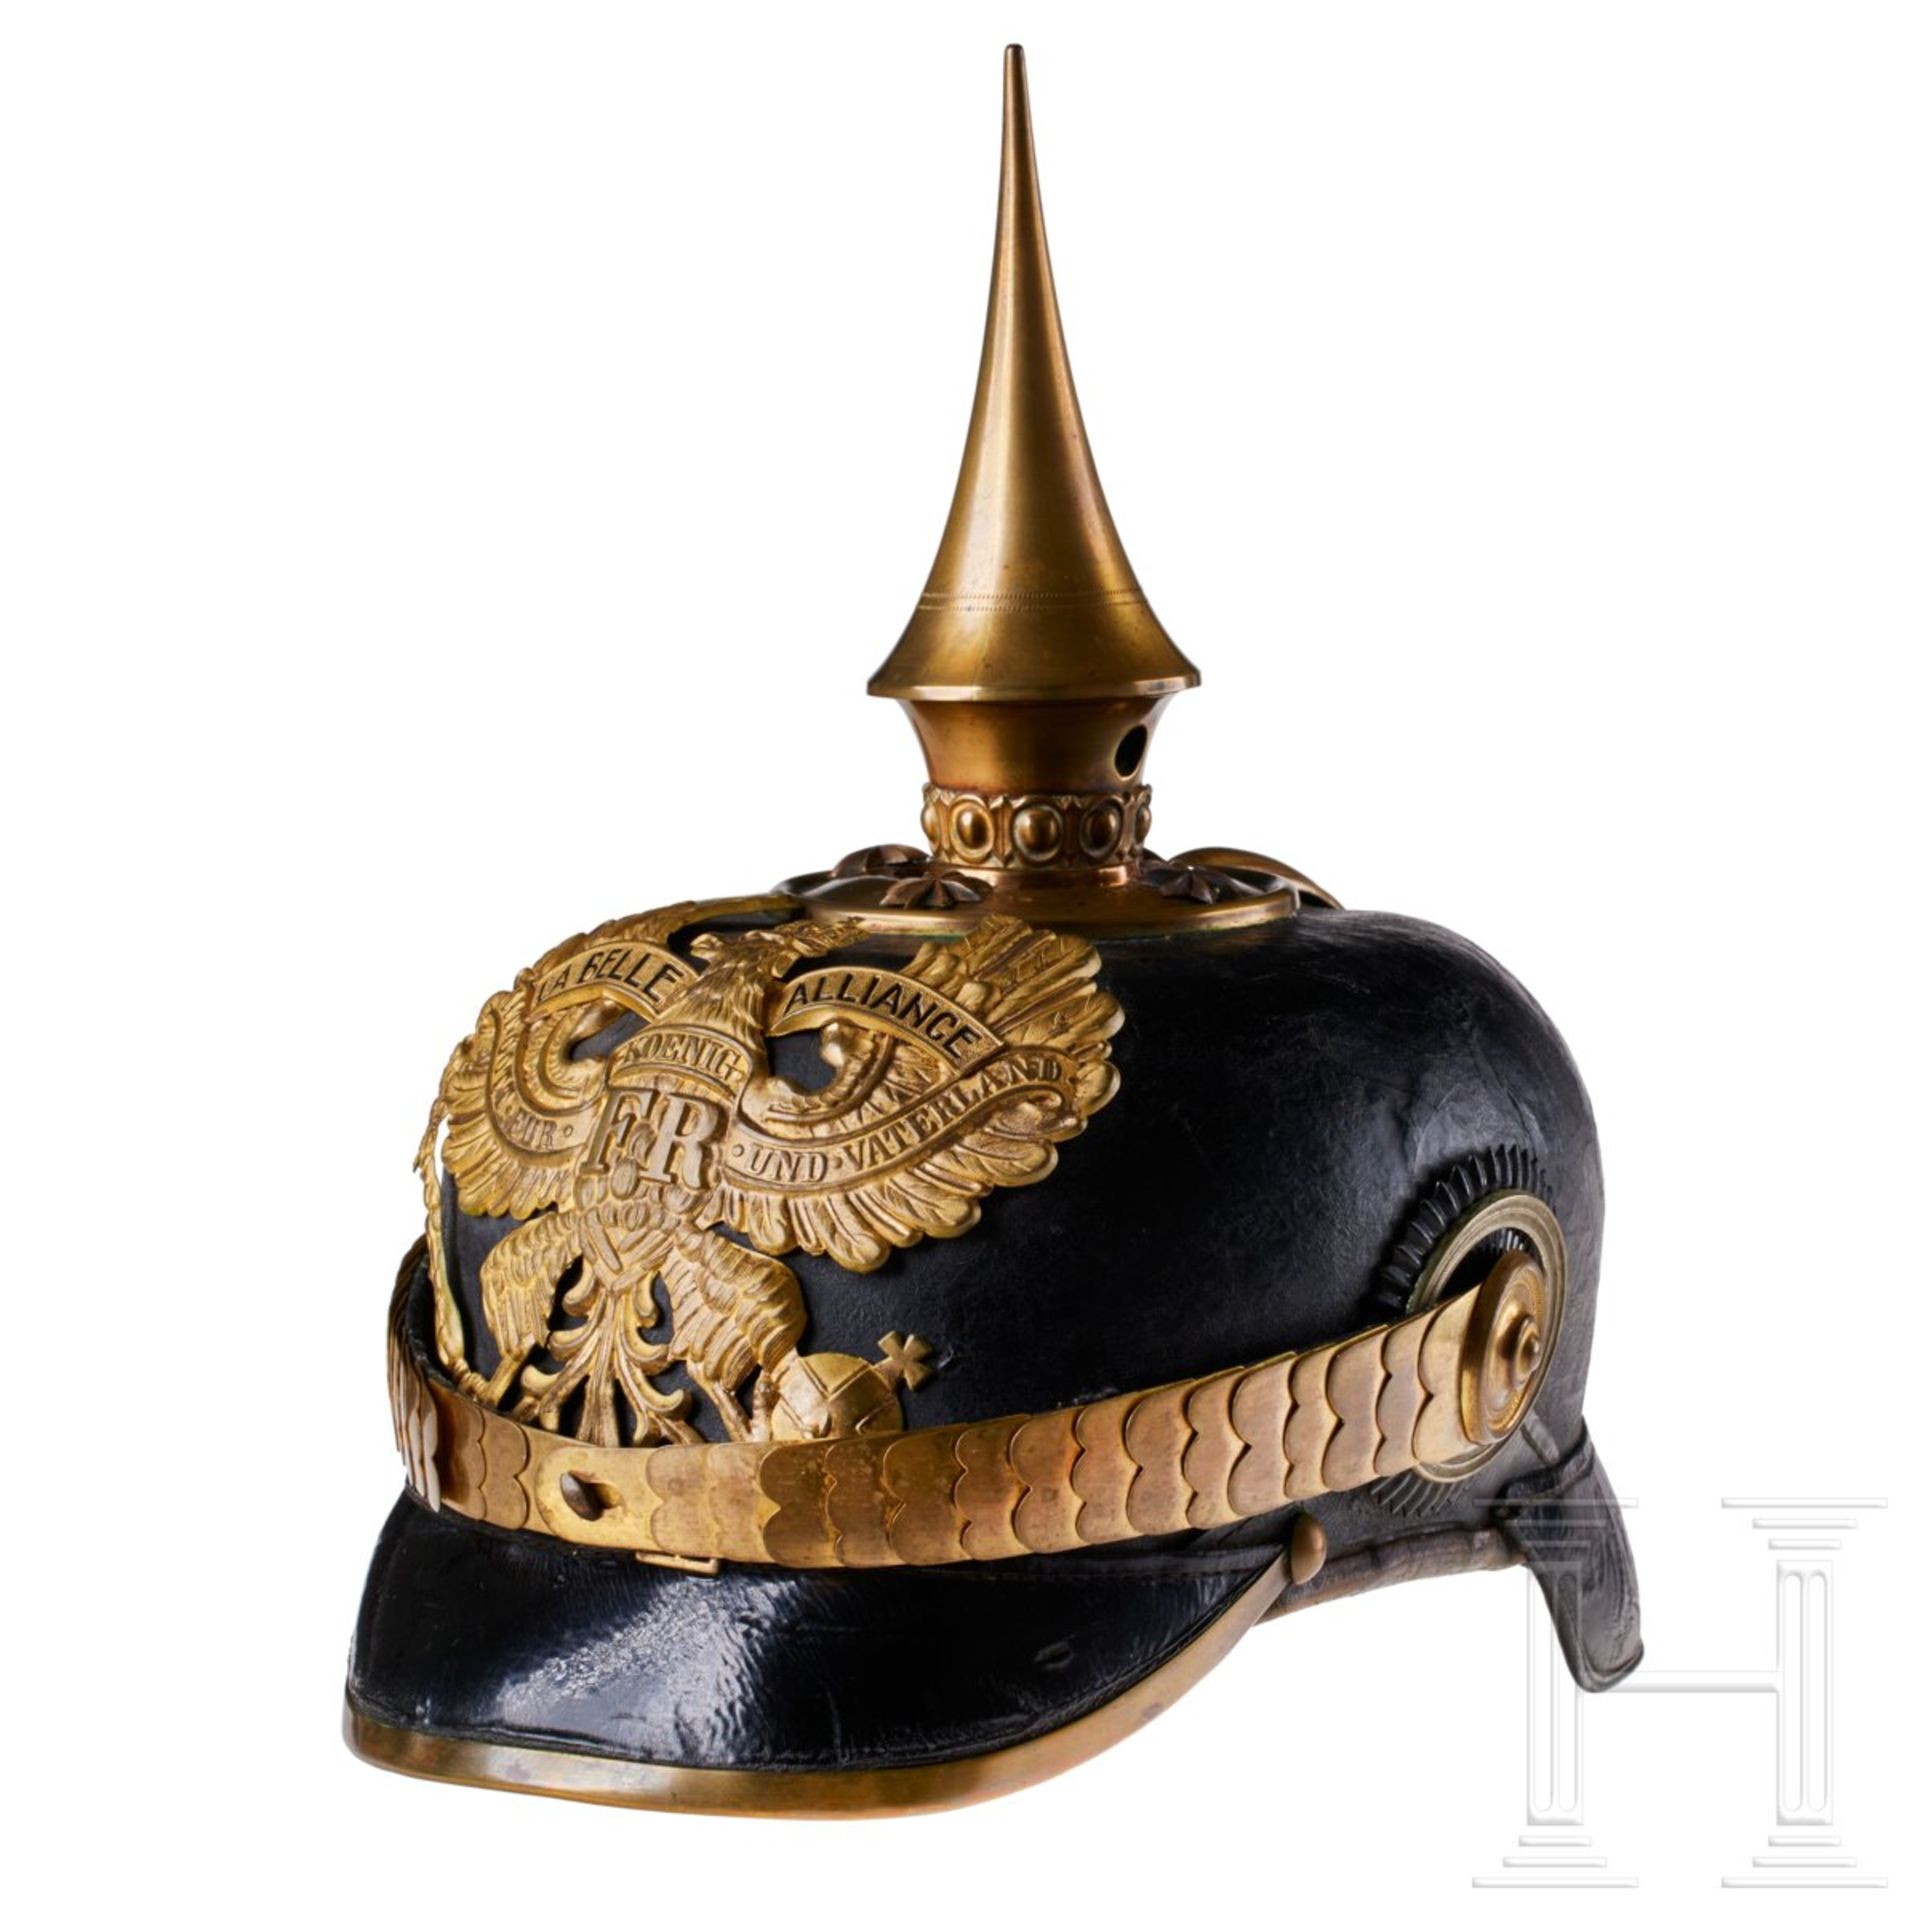 A helmet for Prussian IR 87 Officers